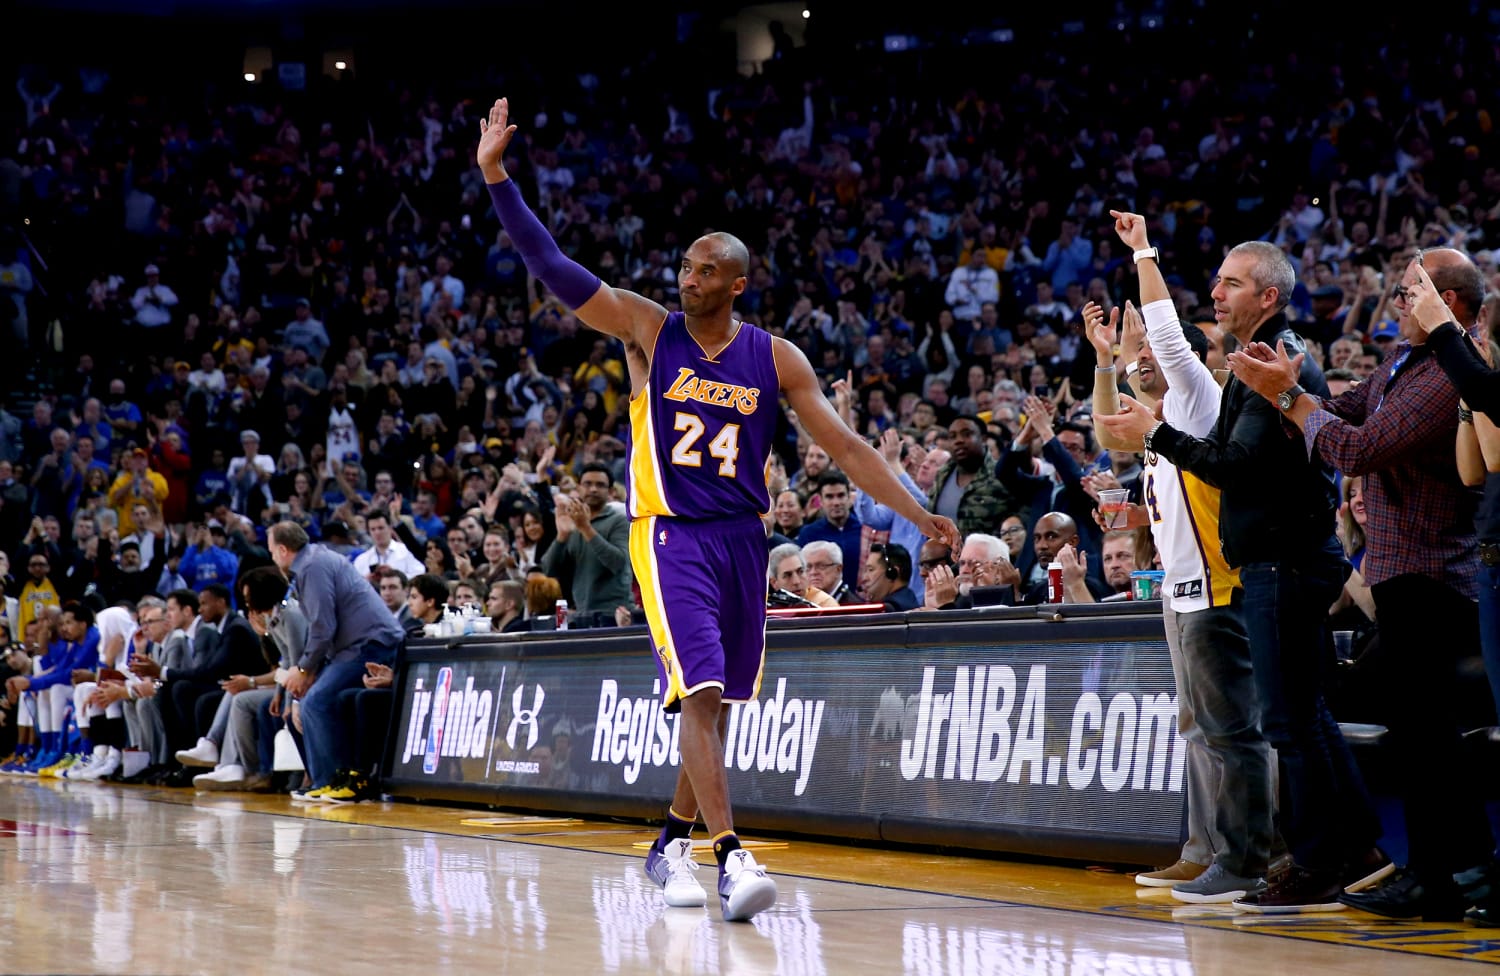 This One Hurt Nba Stars And Public Figures Grieve After Kobe Bryant S Death